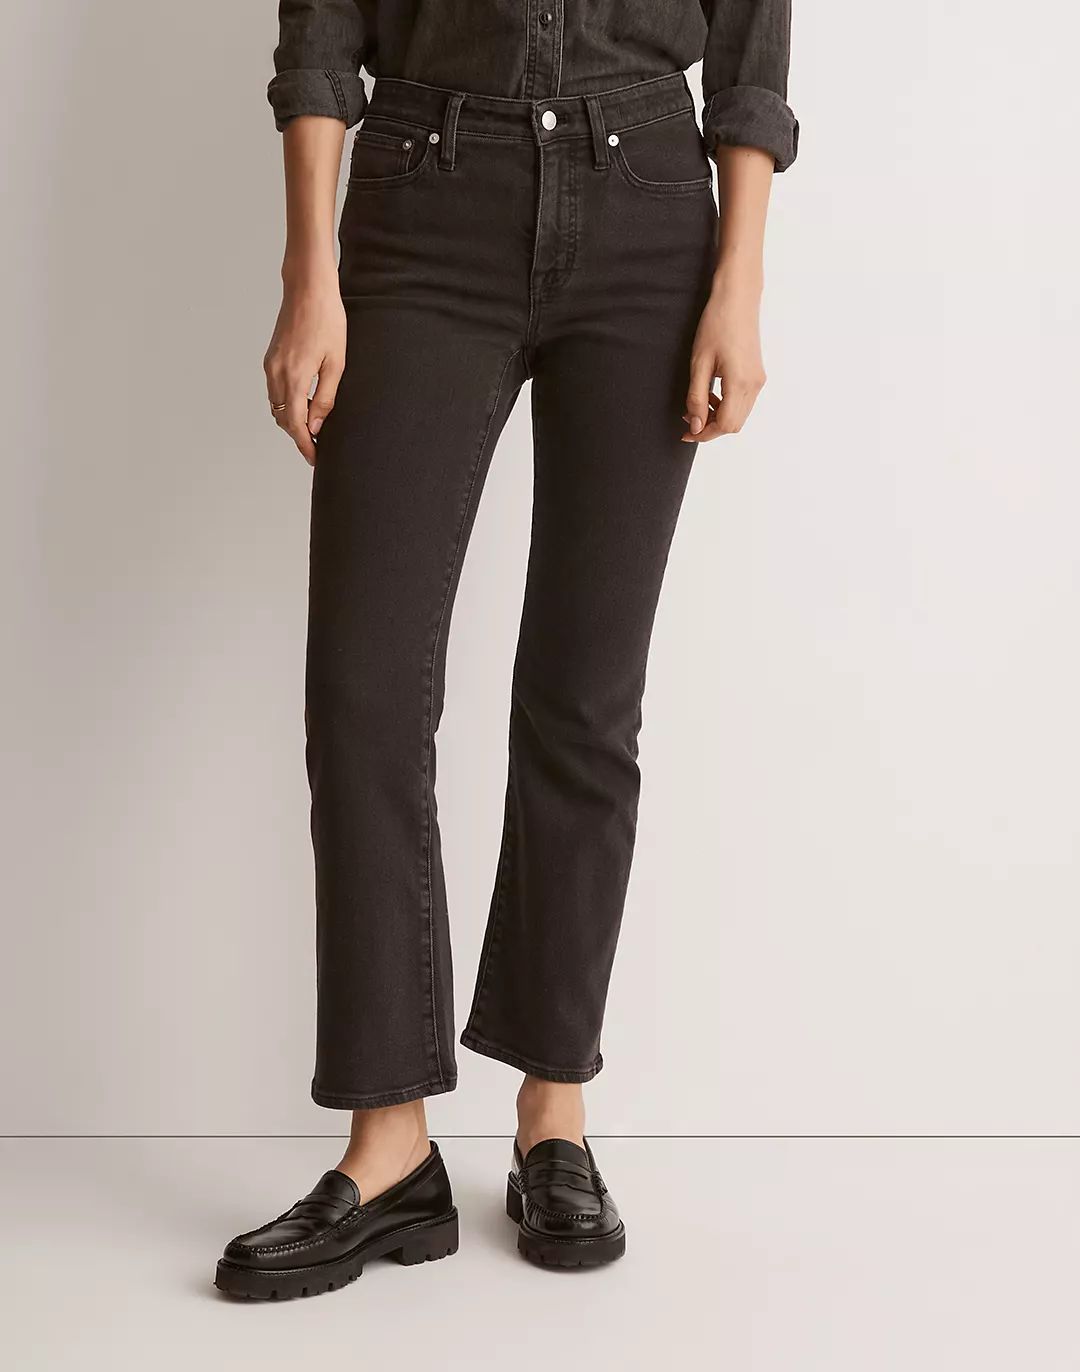 Kick Out Crop Jeans in Starkey Wash | Madewell